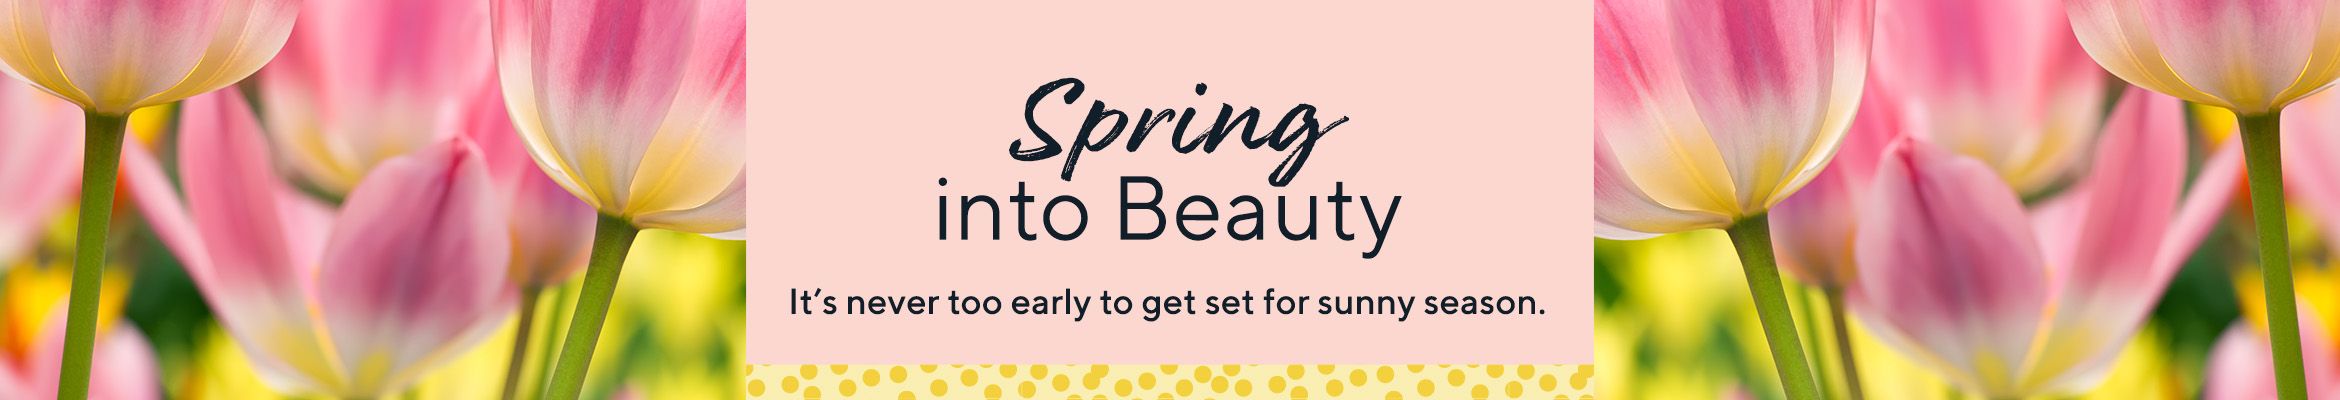 Spring into Beauty - It's never too early to get set for sunny season.